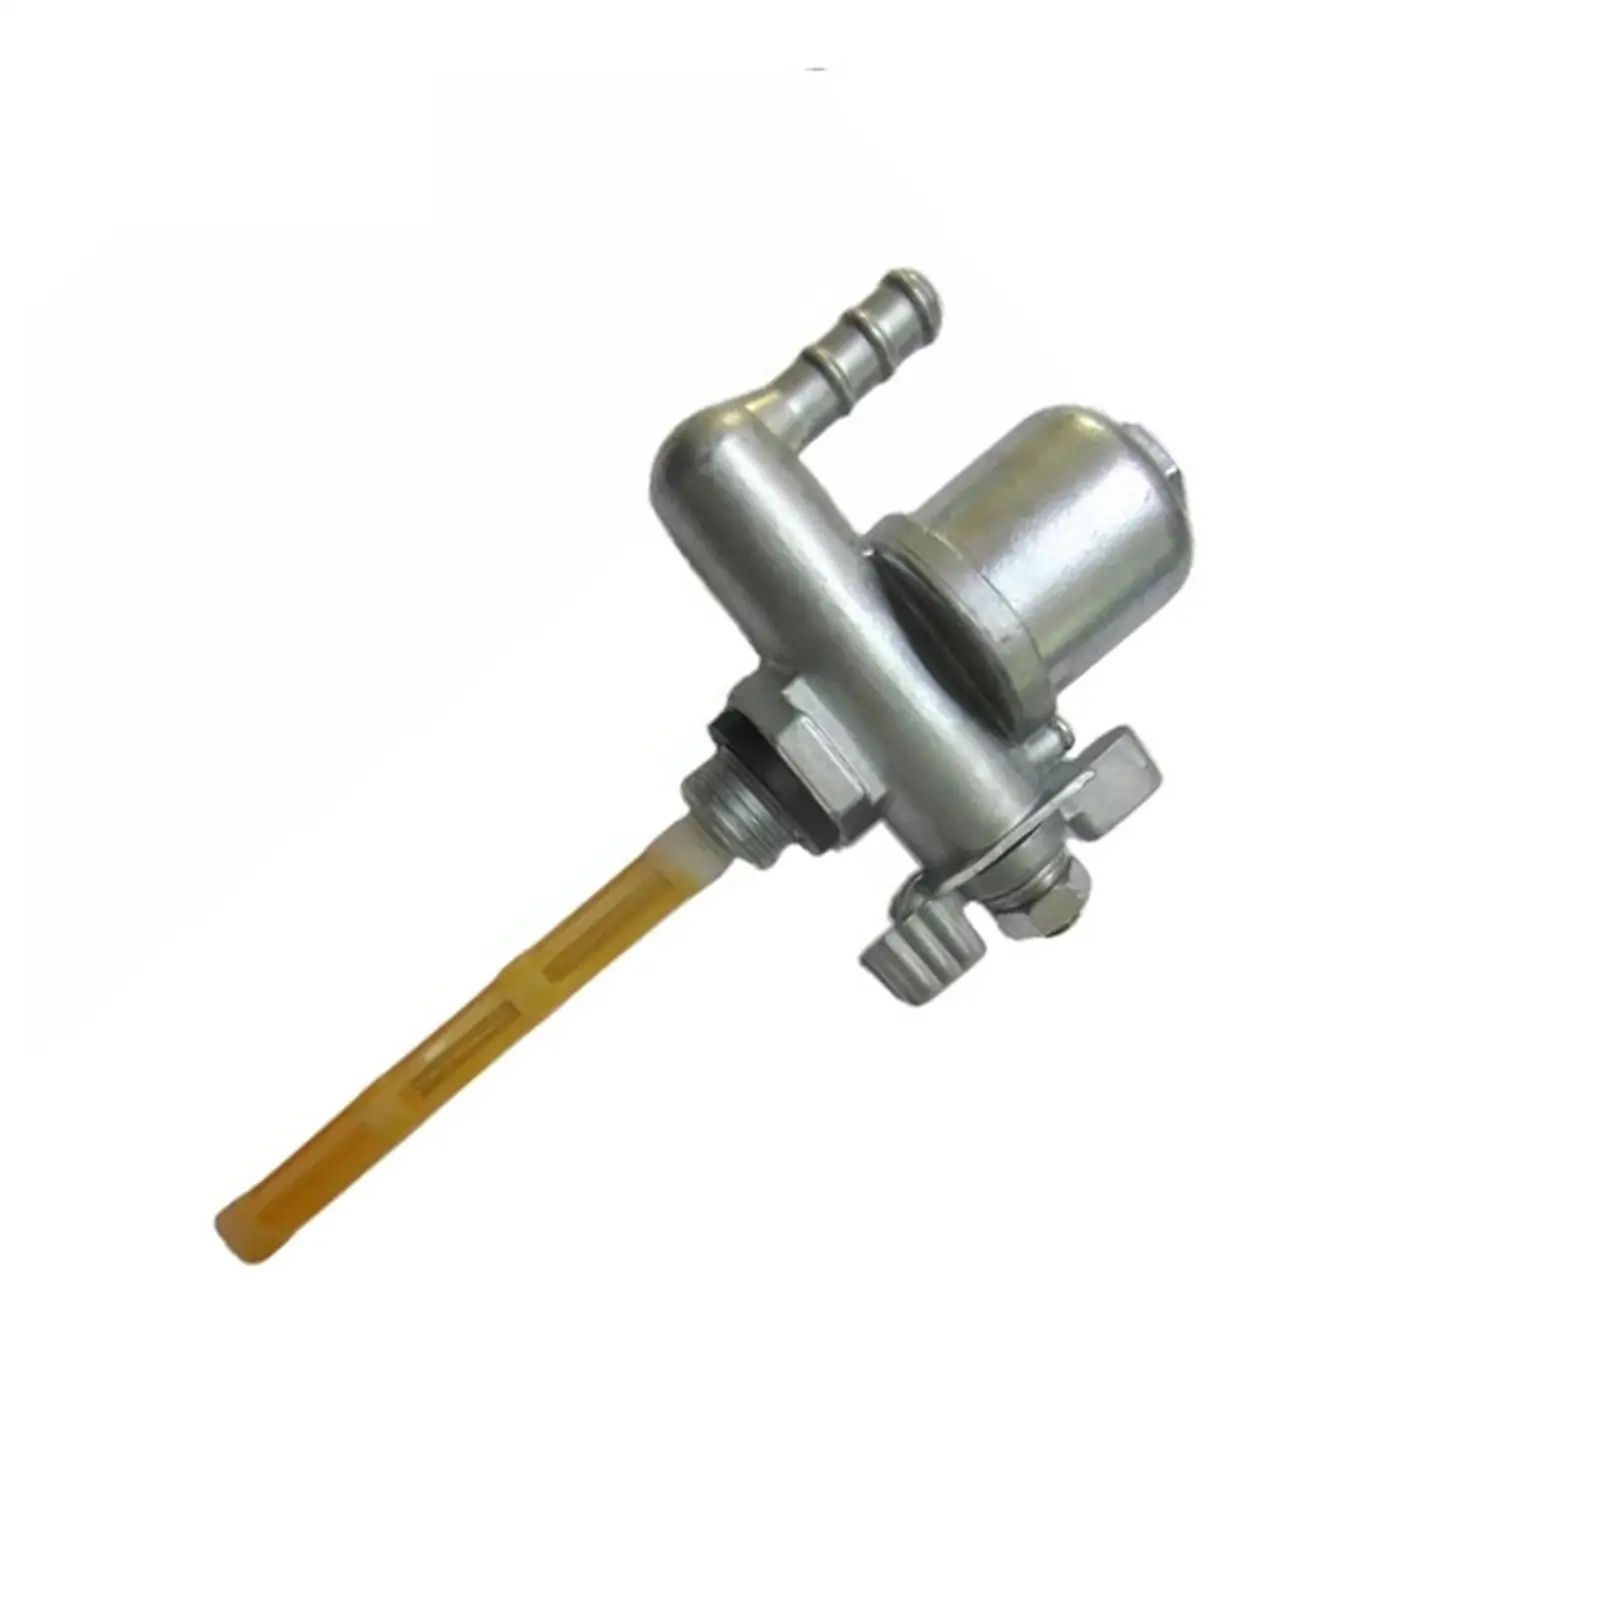 Motorcycle Fuel Gas Tank Switch Valve Petcock Replace for Ruassia Msk